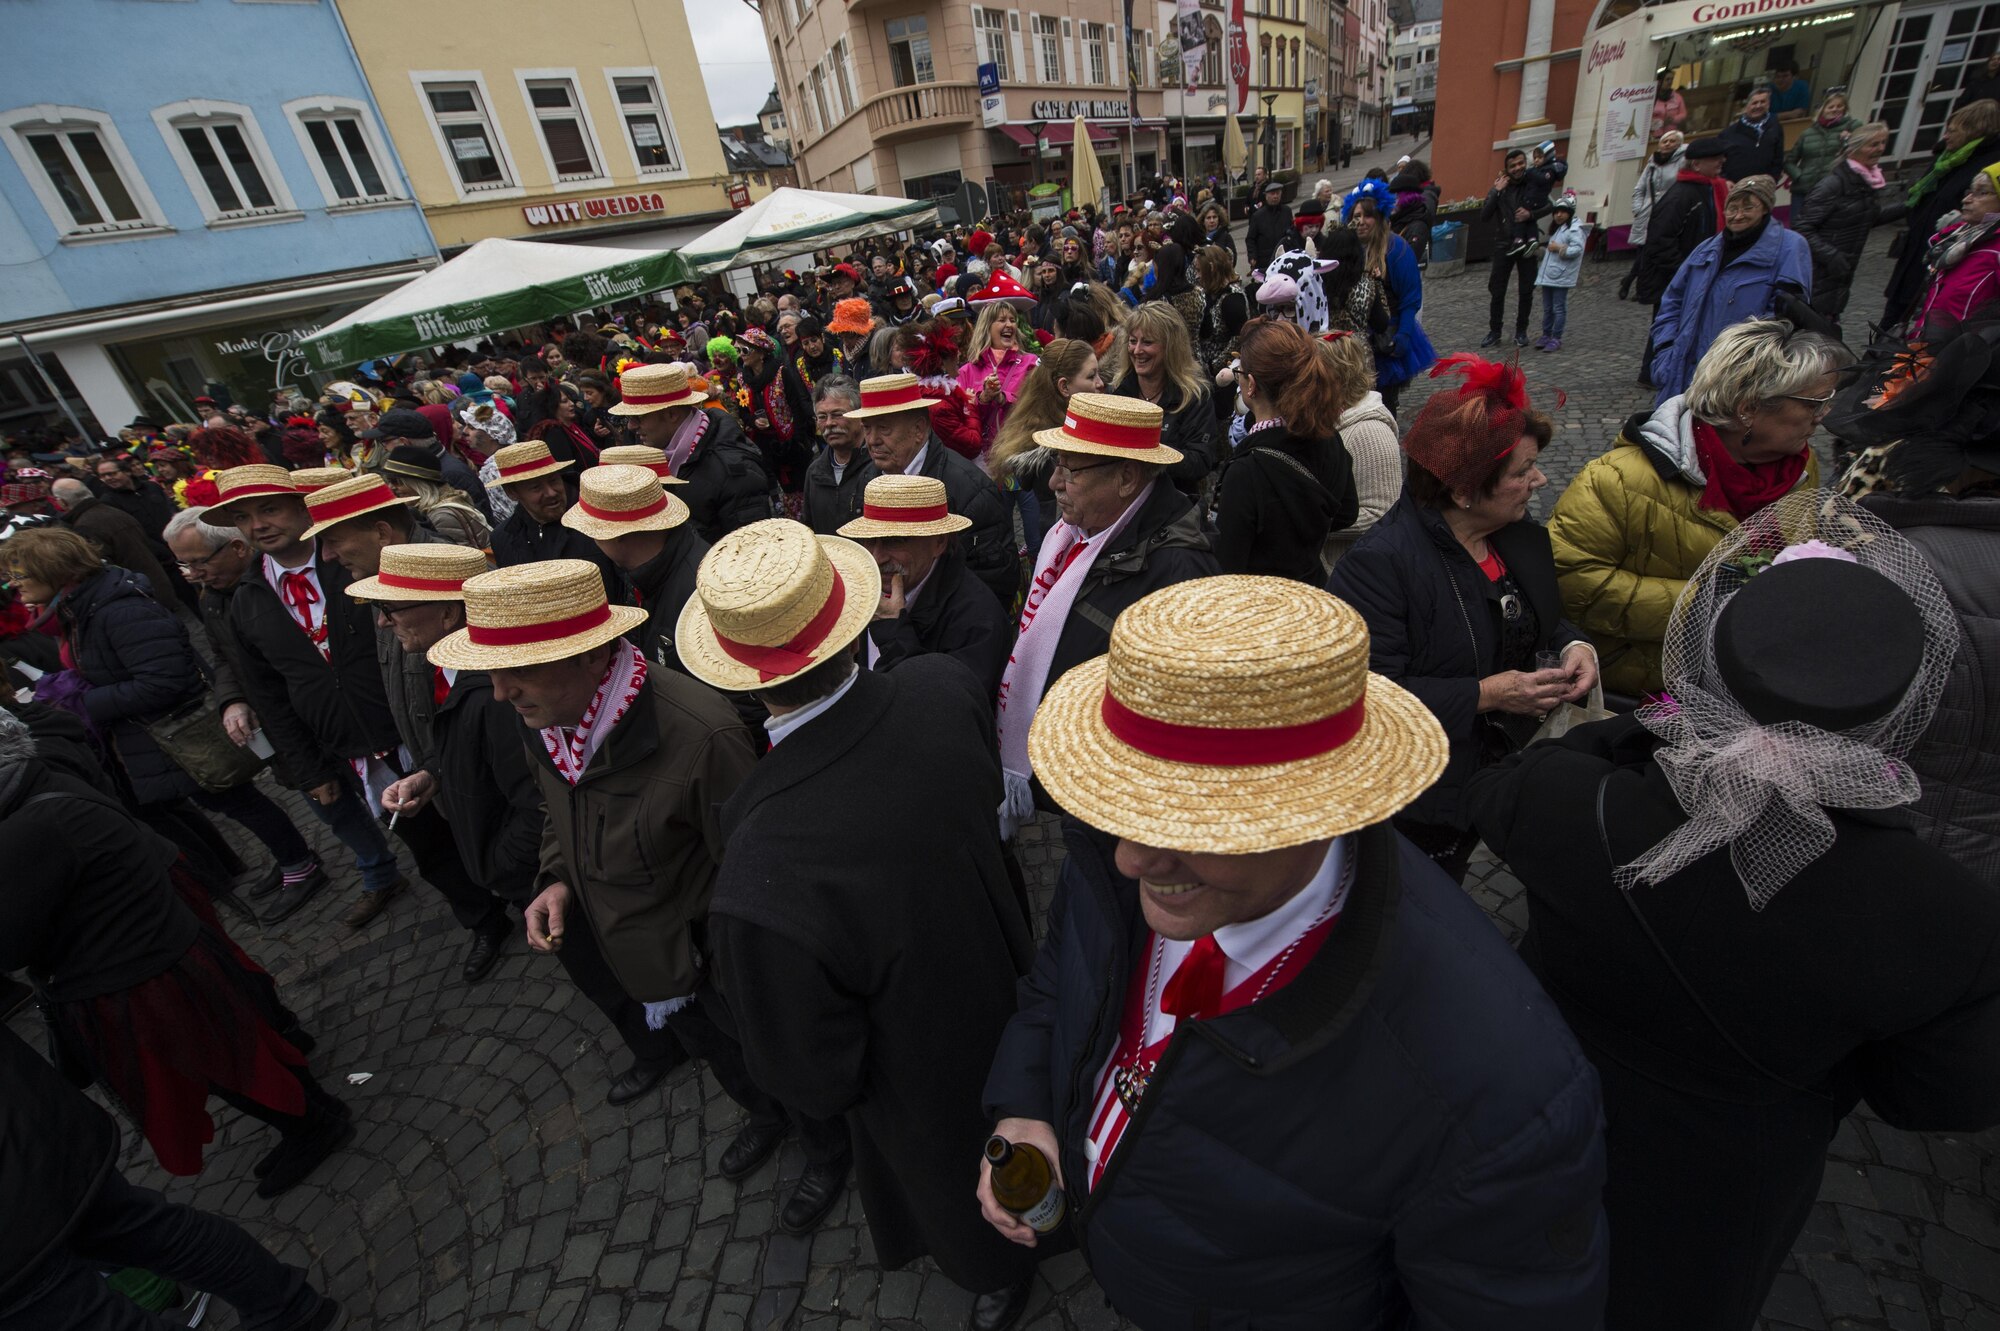 Attendees enjoy the festivities during a Fasching celebration in Wittlich, Germany, Feb. 23, 2017. More than 250 citizens attended the celebration inside the city's main square. (U.S. Air Force photo by Staff Sgt. Jonathan Snyder)